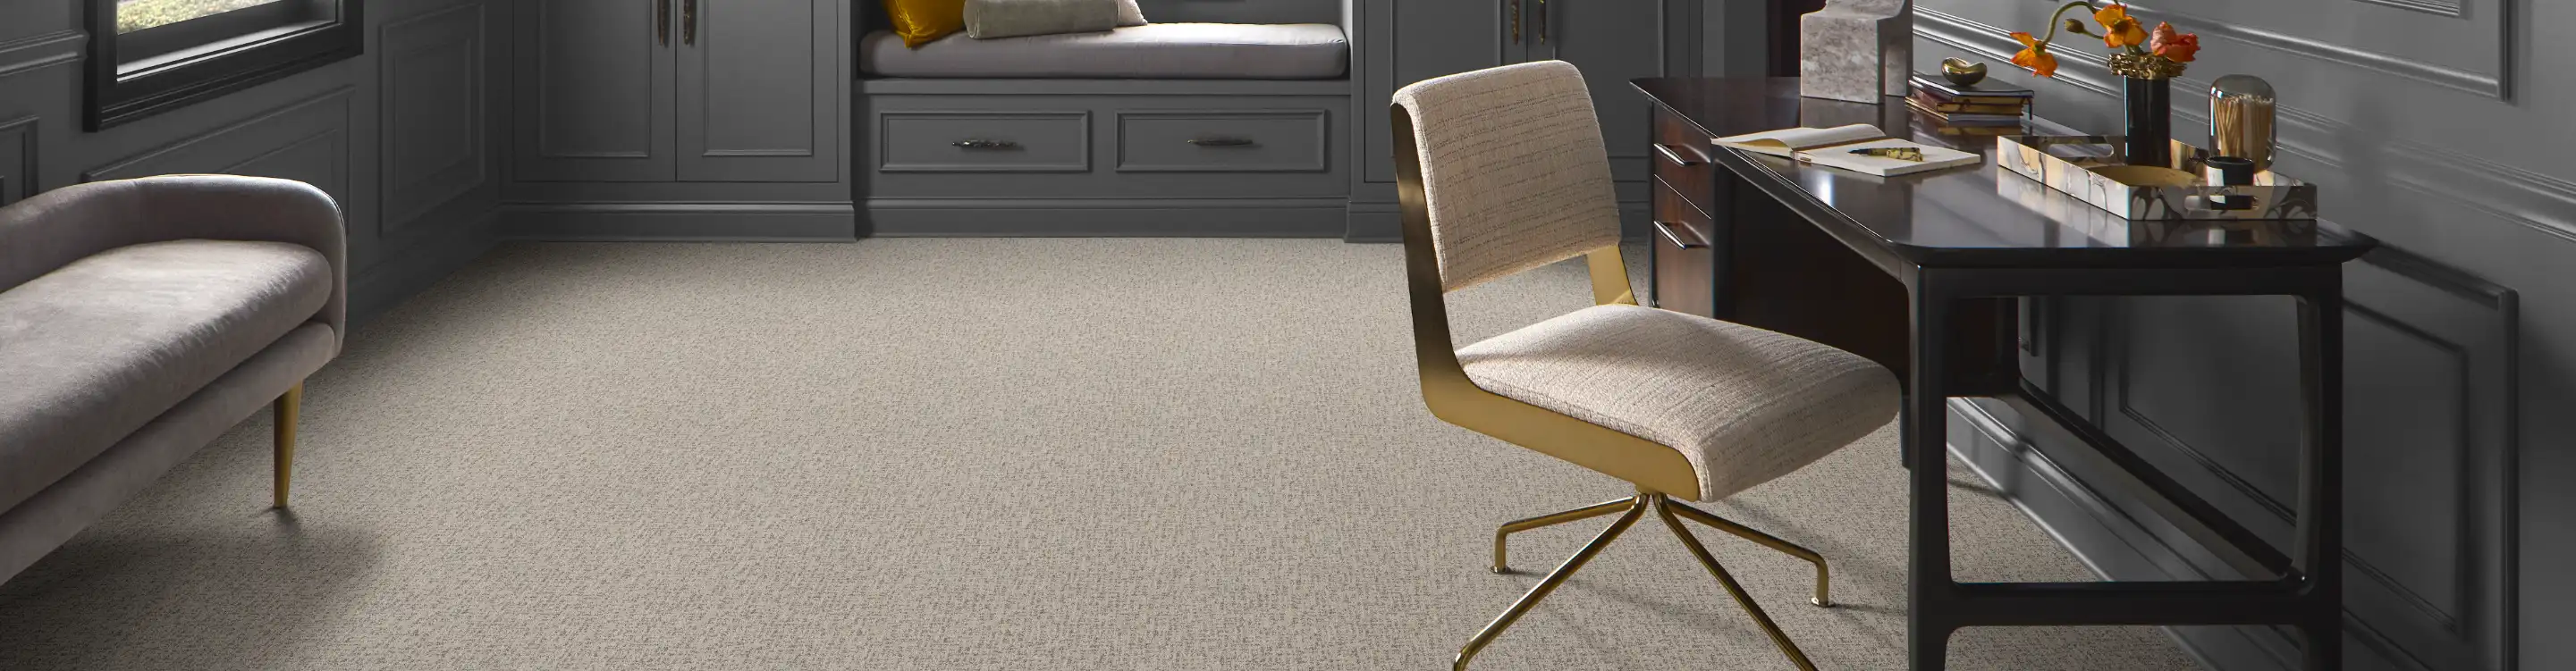 Carpet Padding Buyers Guide: How to Choose the Best Padding for